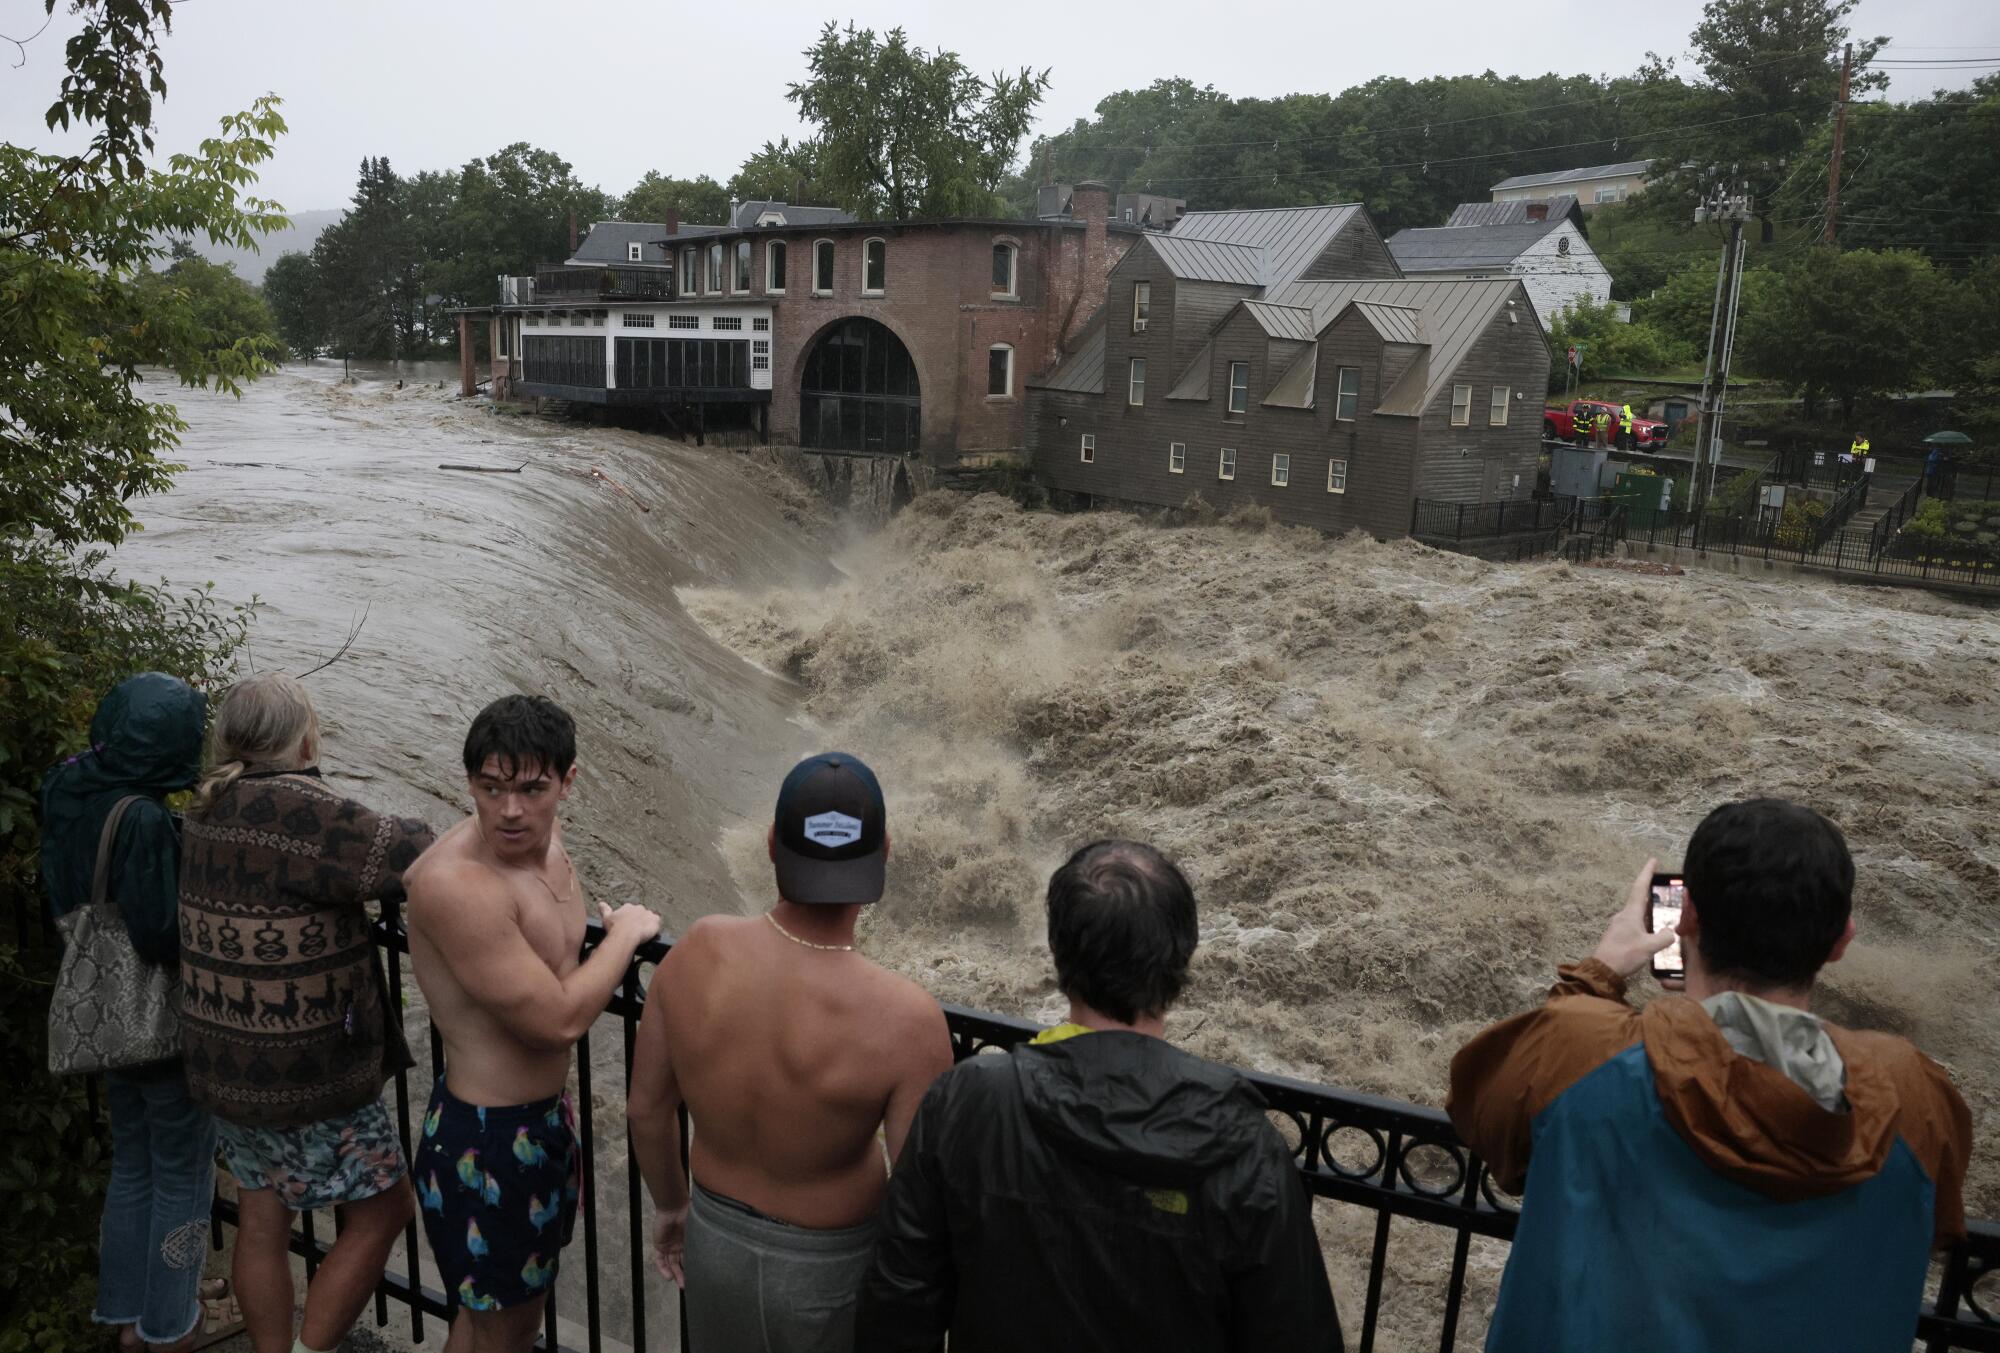 Several people standing at a railing overlooking an expanse of muddy, roiling water as it passes historic buildings.